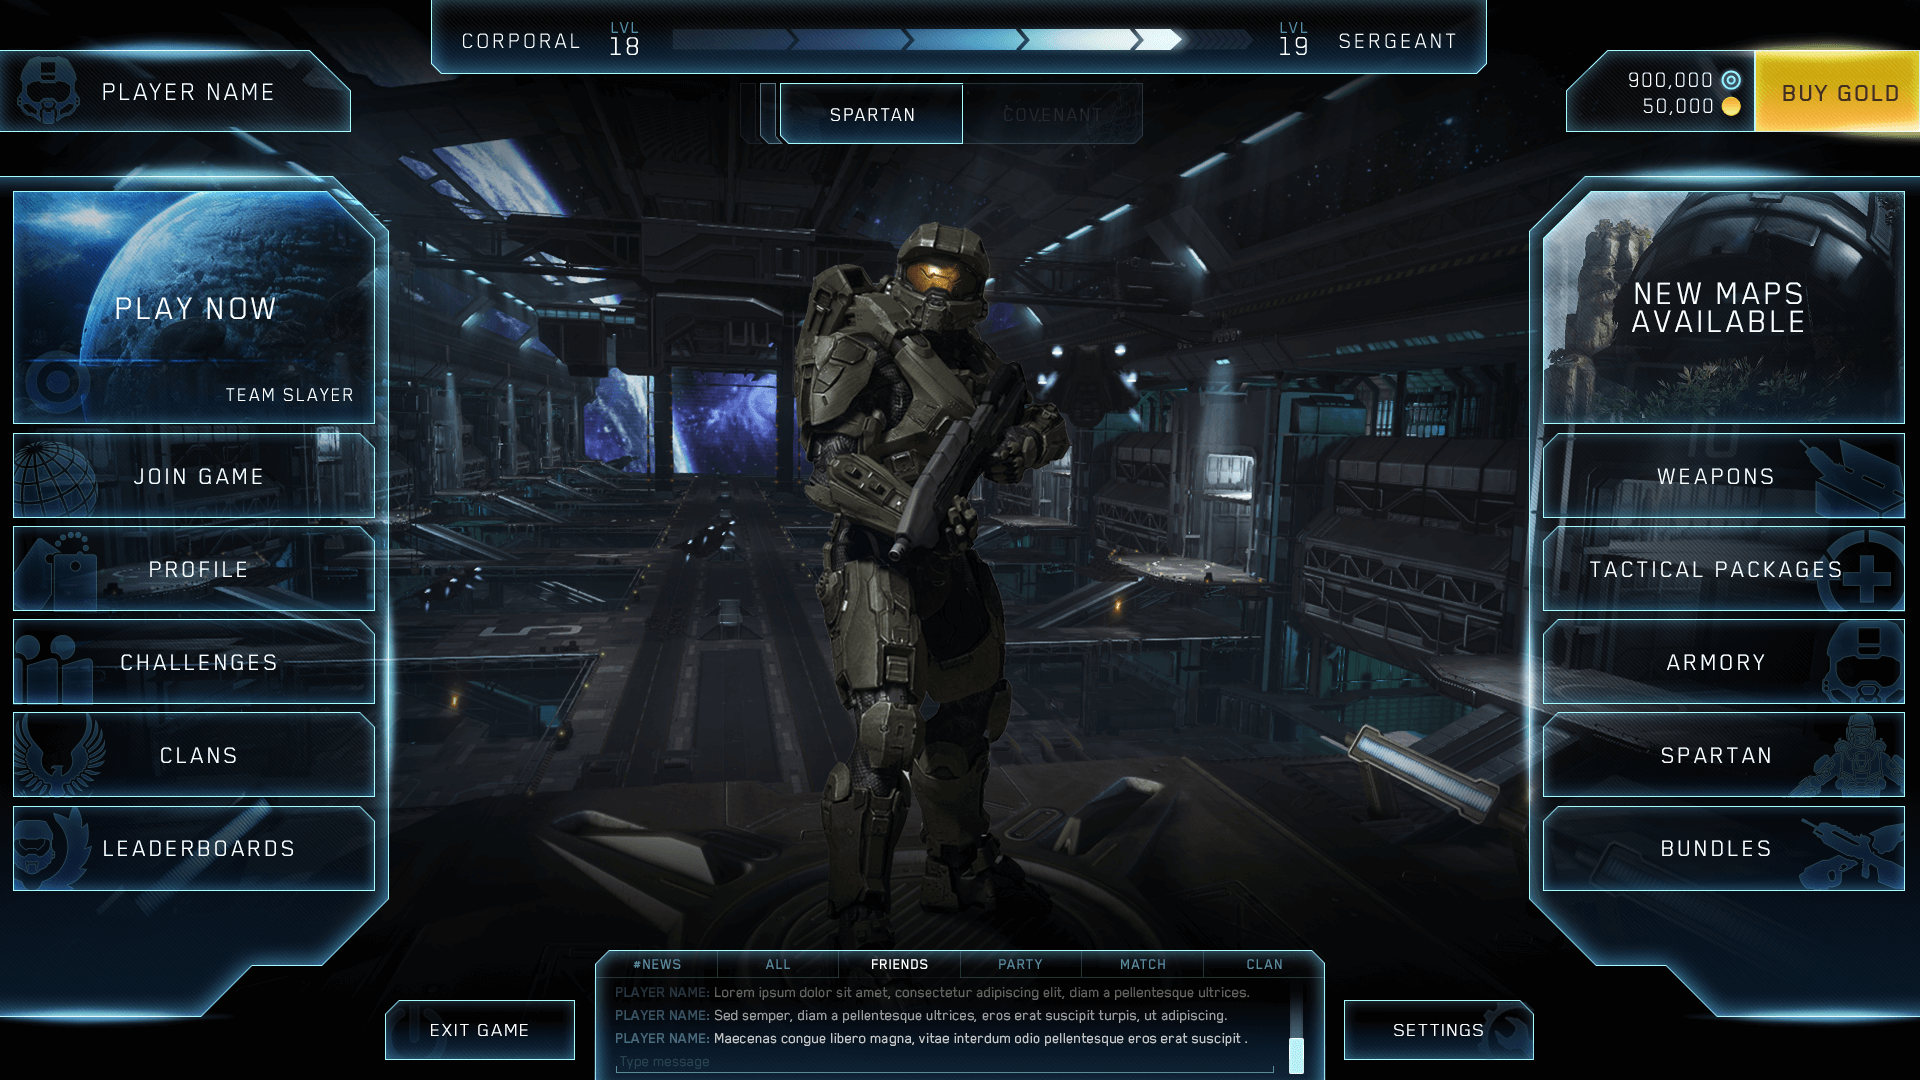 Halo Online main menu screen with a Spartan centered inside a hanger with navigation along the left and right side.